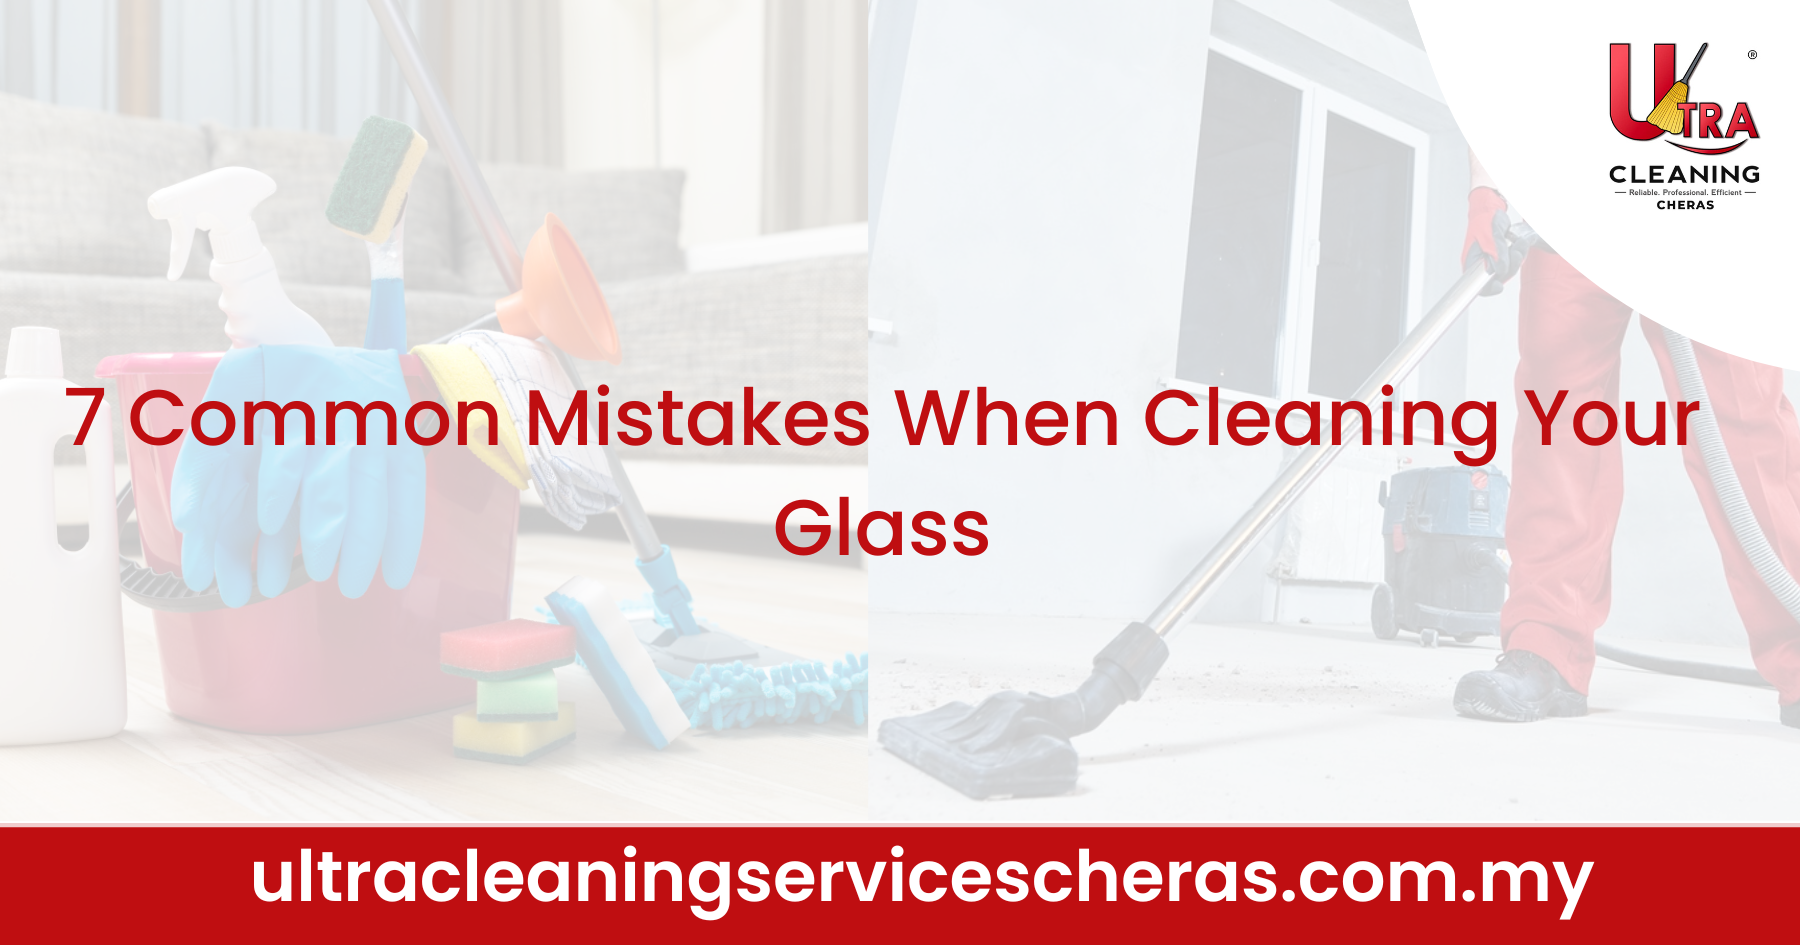 7 Common Mistakes When Cleaning Your Glass